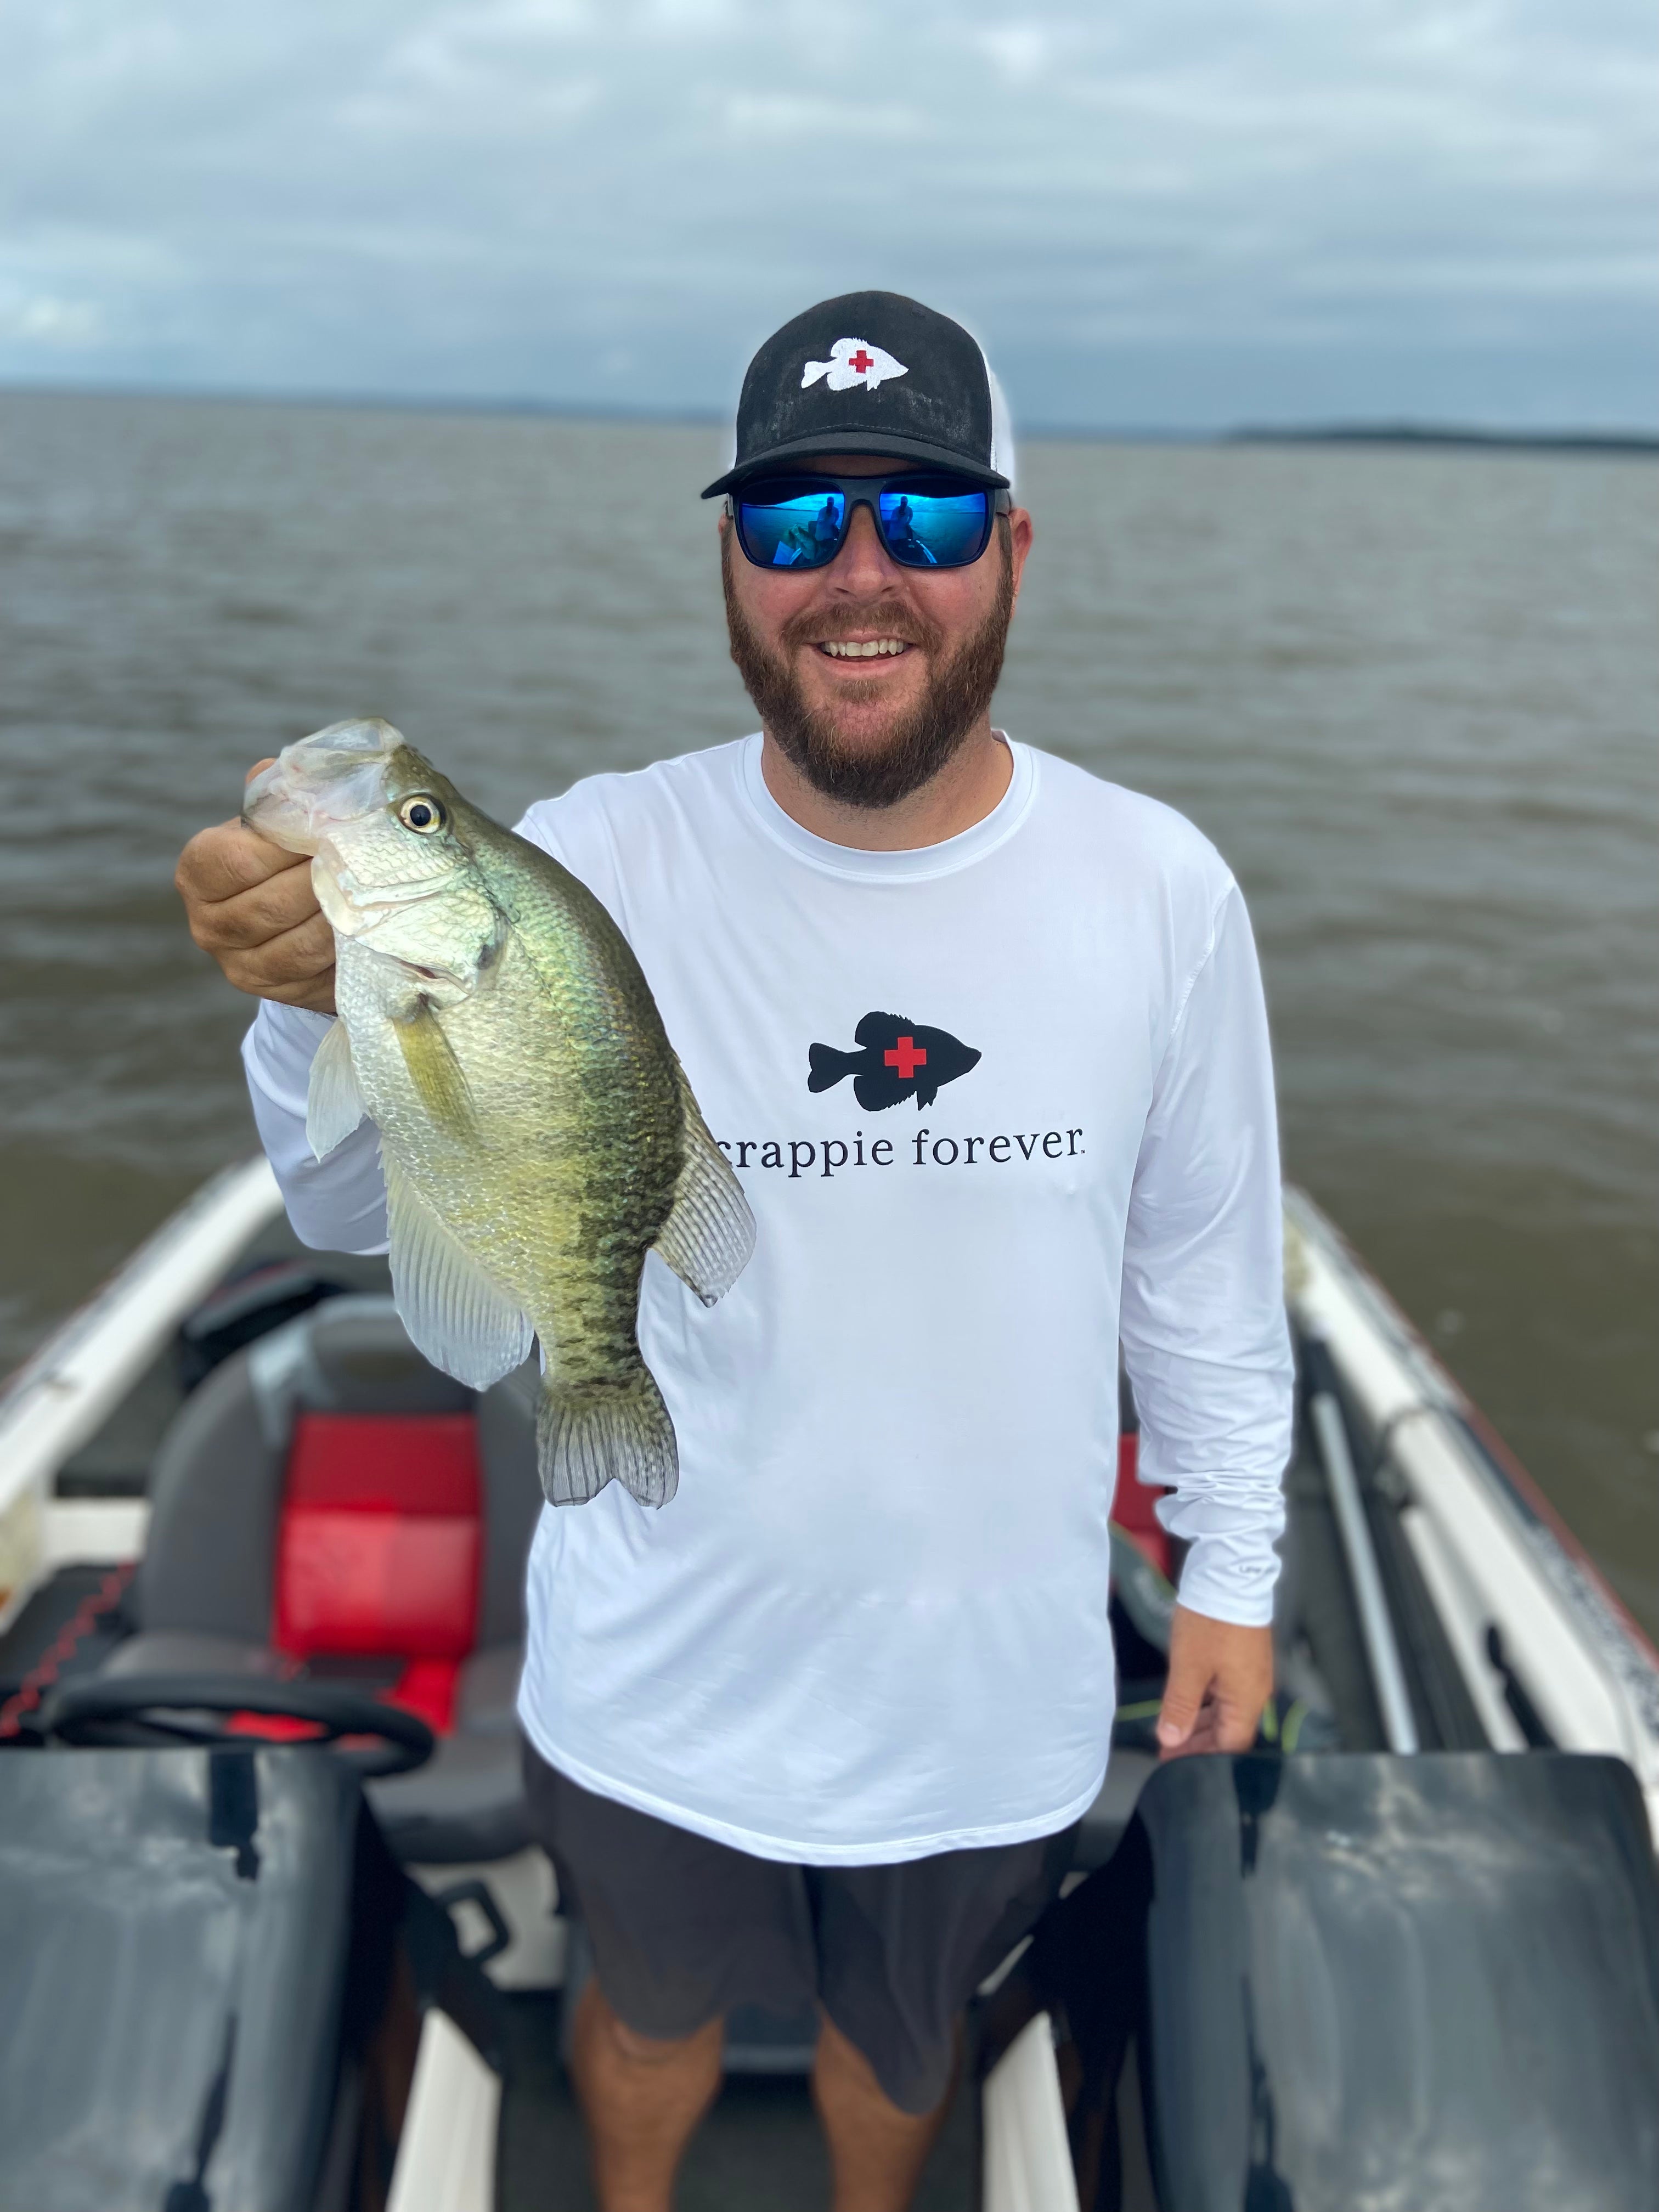 Crappie Forever Fishing Shirts